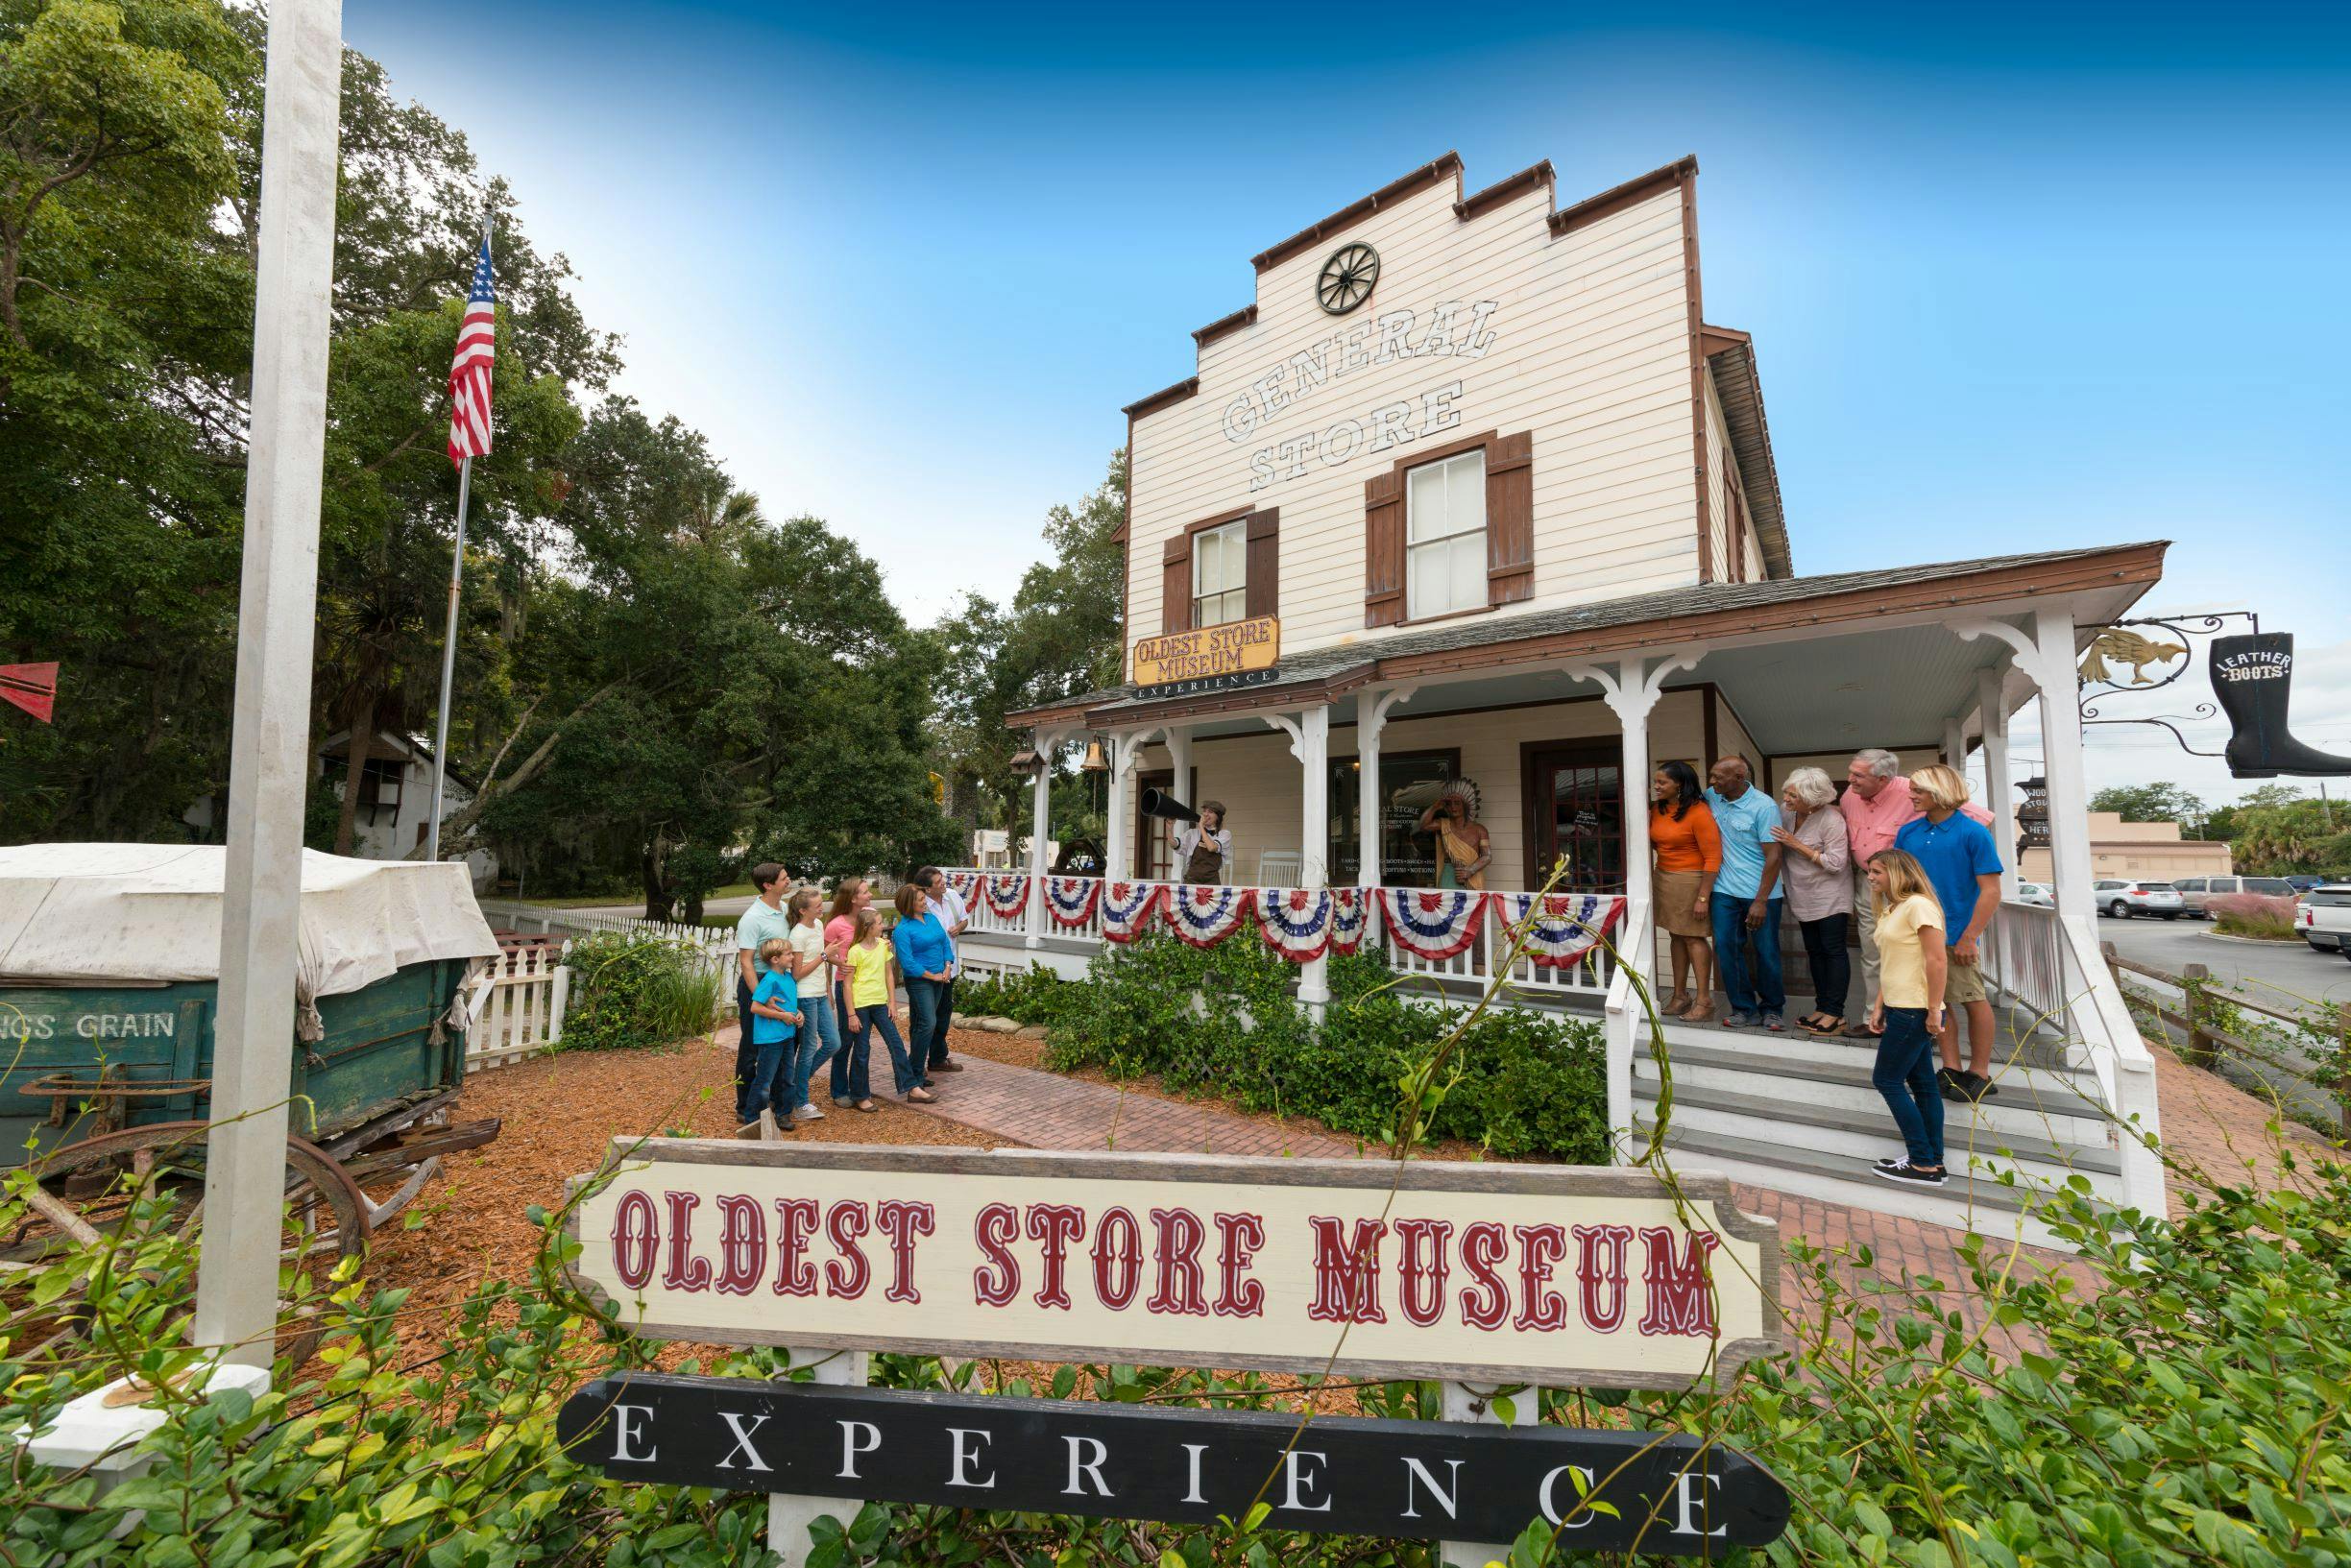 St. Augustine's Oldest Store Museum experience